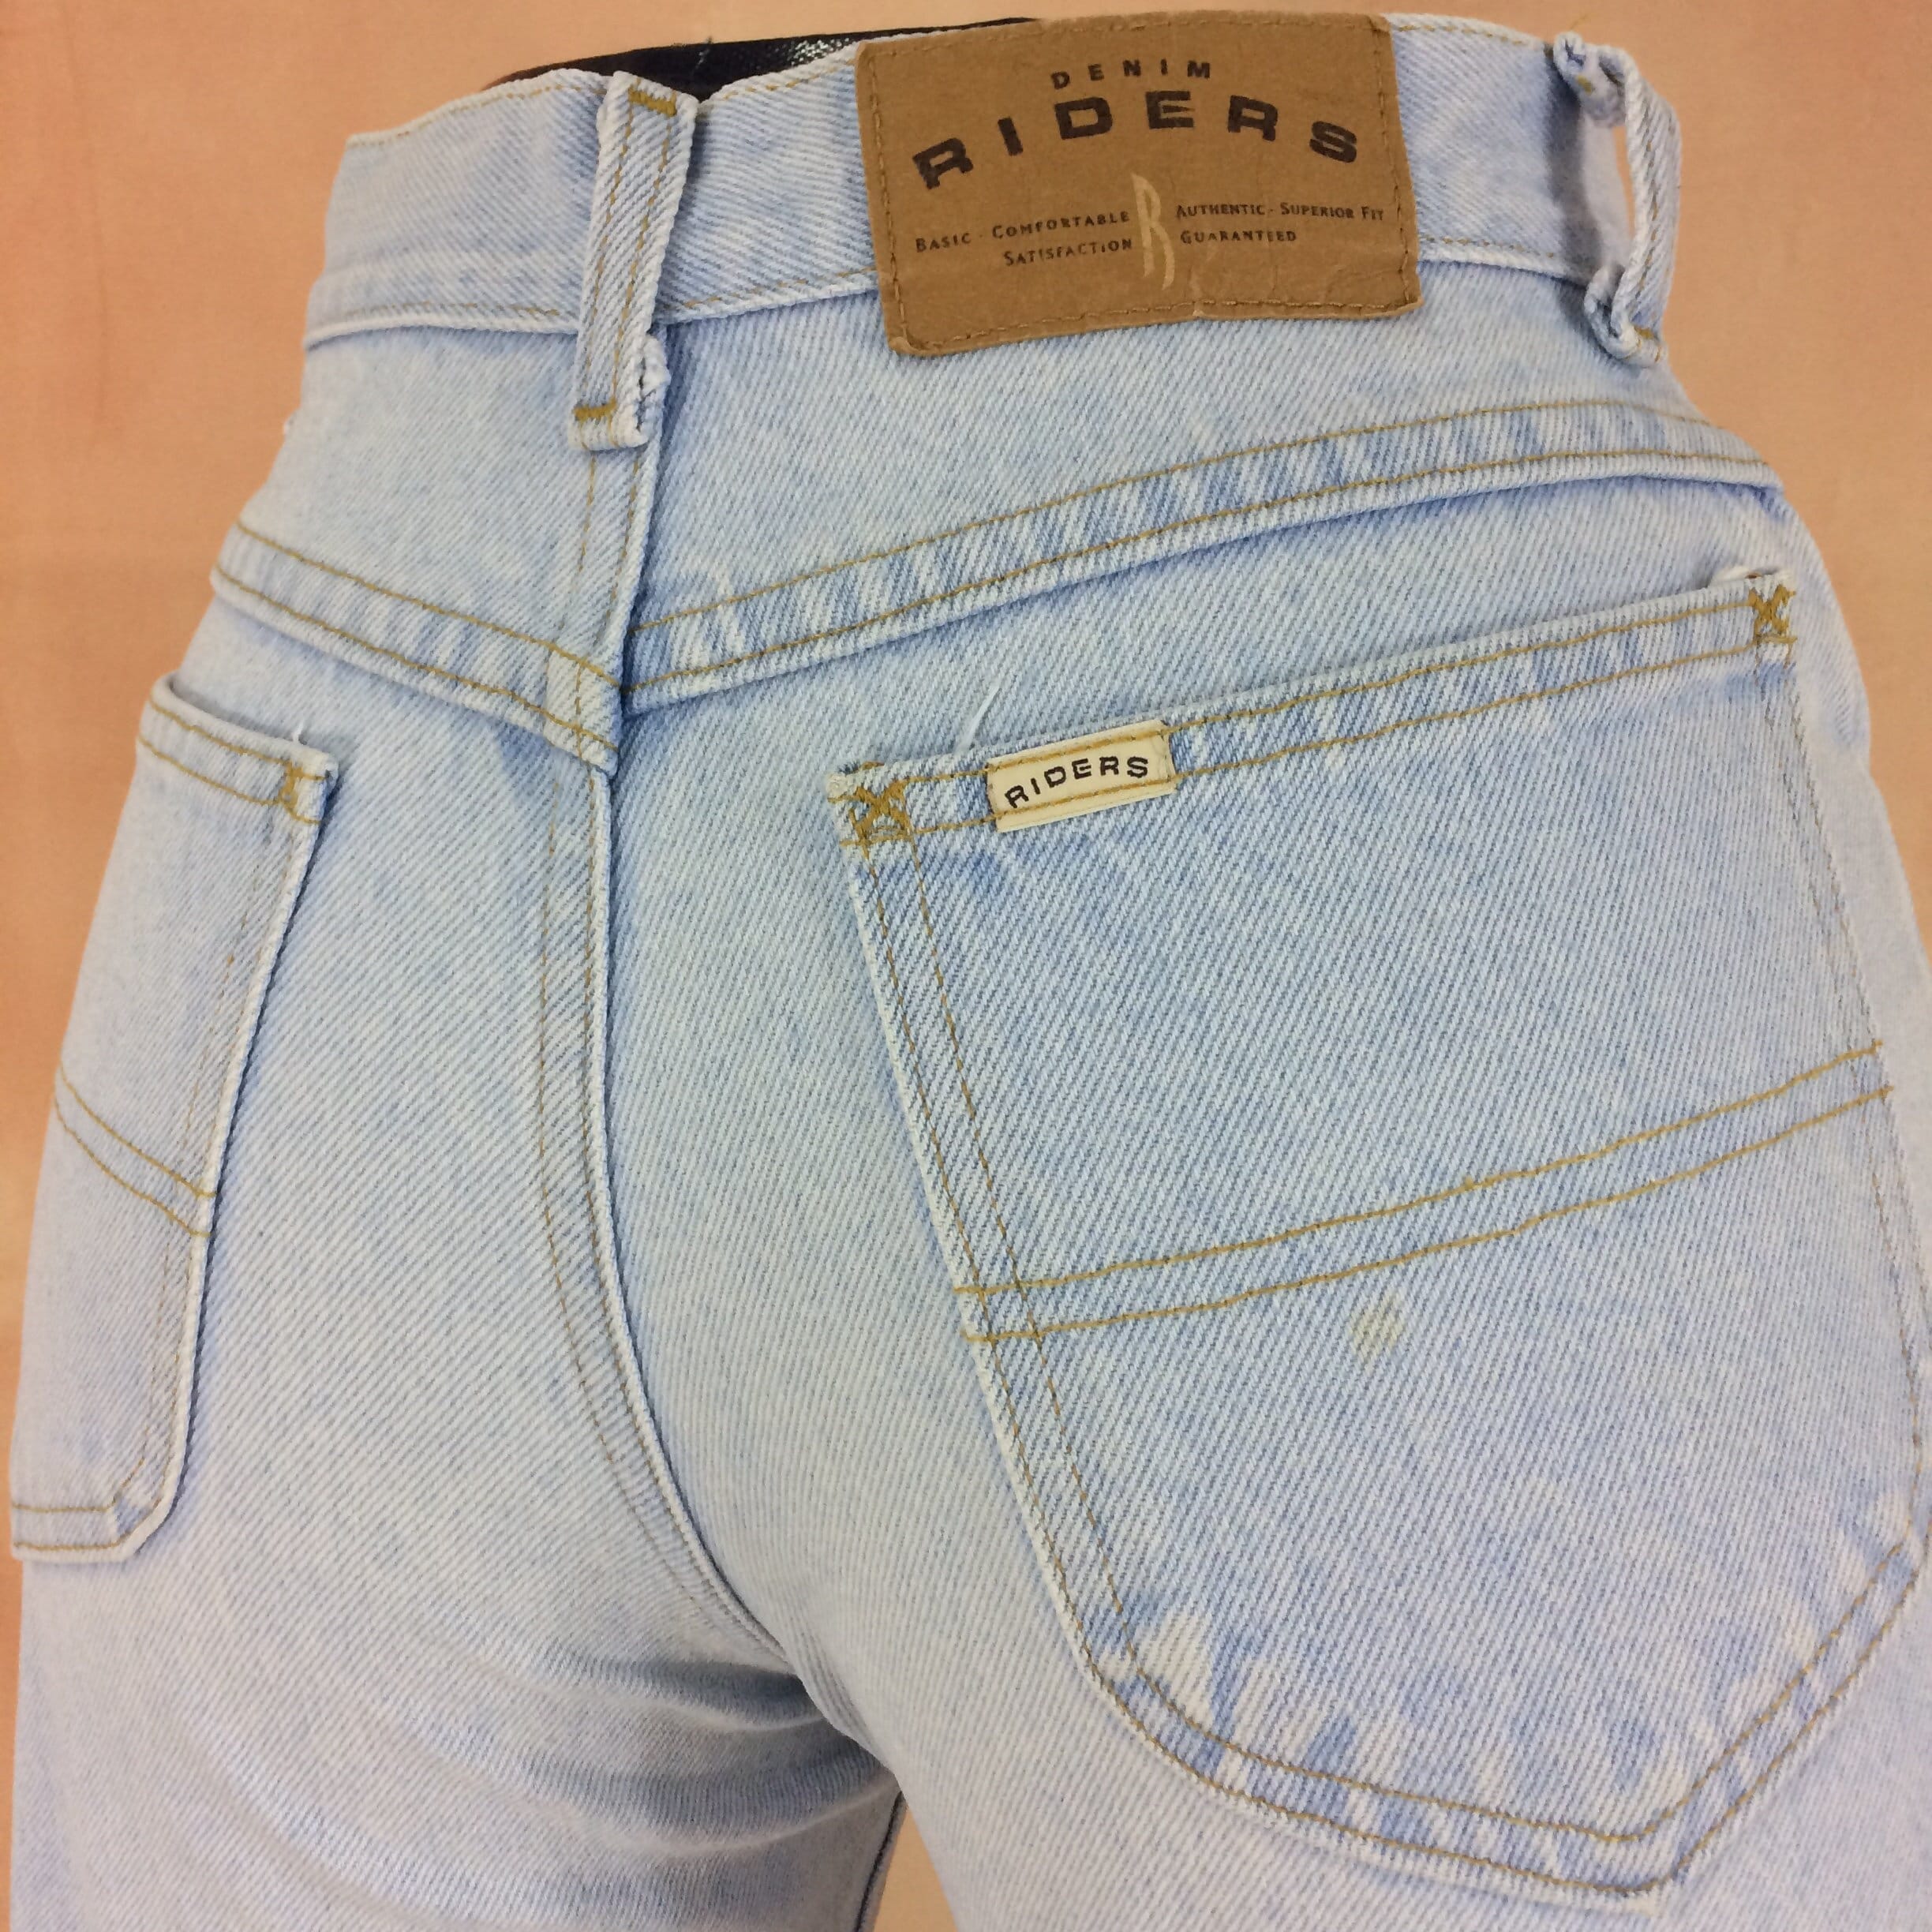 Size 25 Vintage Denim Riders Vintage Jeans High Waisted Y2k's Tiny Small  Waist Western Jeans Petite Jeans Classic Mom Jeans Made in USA 